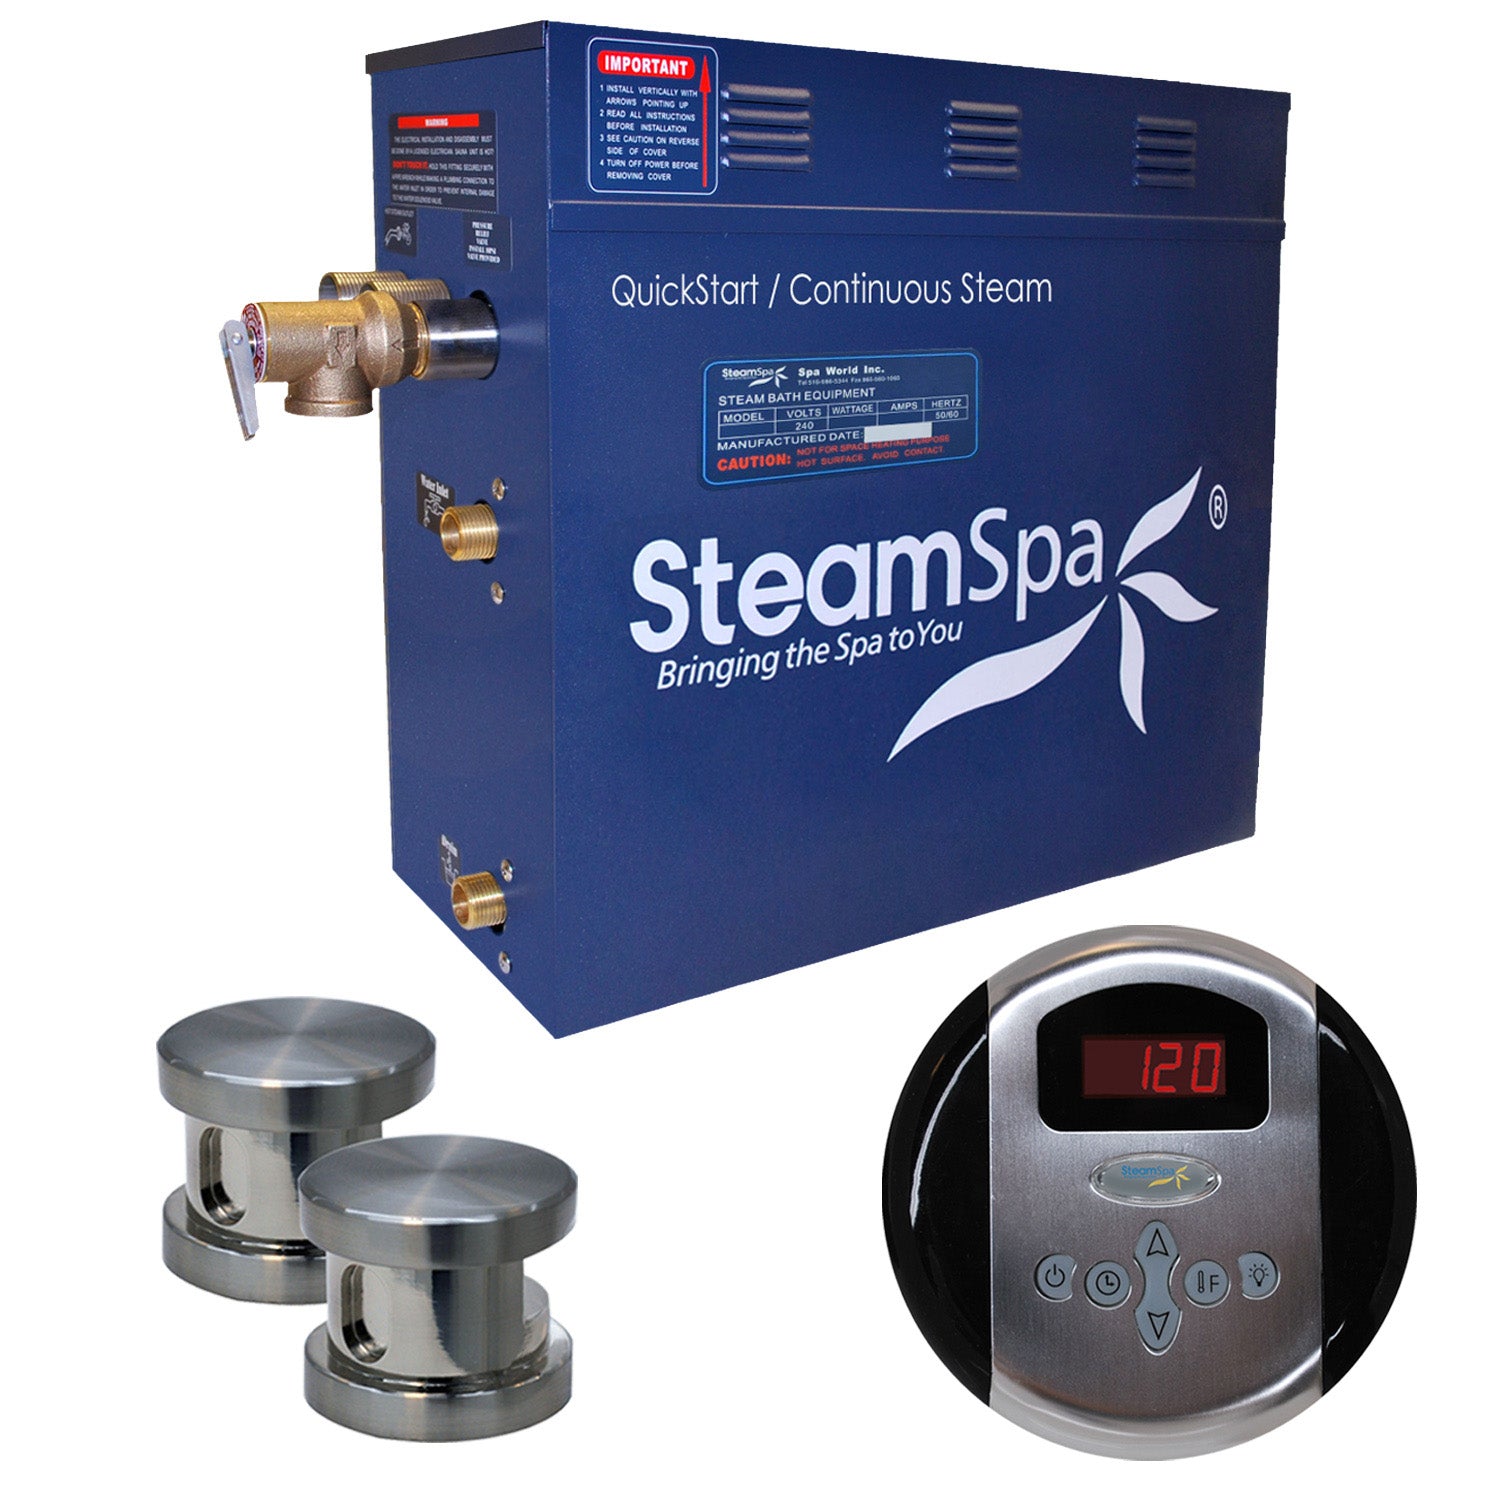 SteamSpa Oasis 4.5 KW QuickStart Acu-Steam Bath Generator Package - 12 in. L x 6 in. W x 2 in. H - Stainless Steel - Brushed Nickel finish - Includes a 4.5kW QuickStart Acu-Steam Bath Generator, Control Panel, Two Steam heads - OA450 - Vital Hydrotherapy